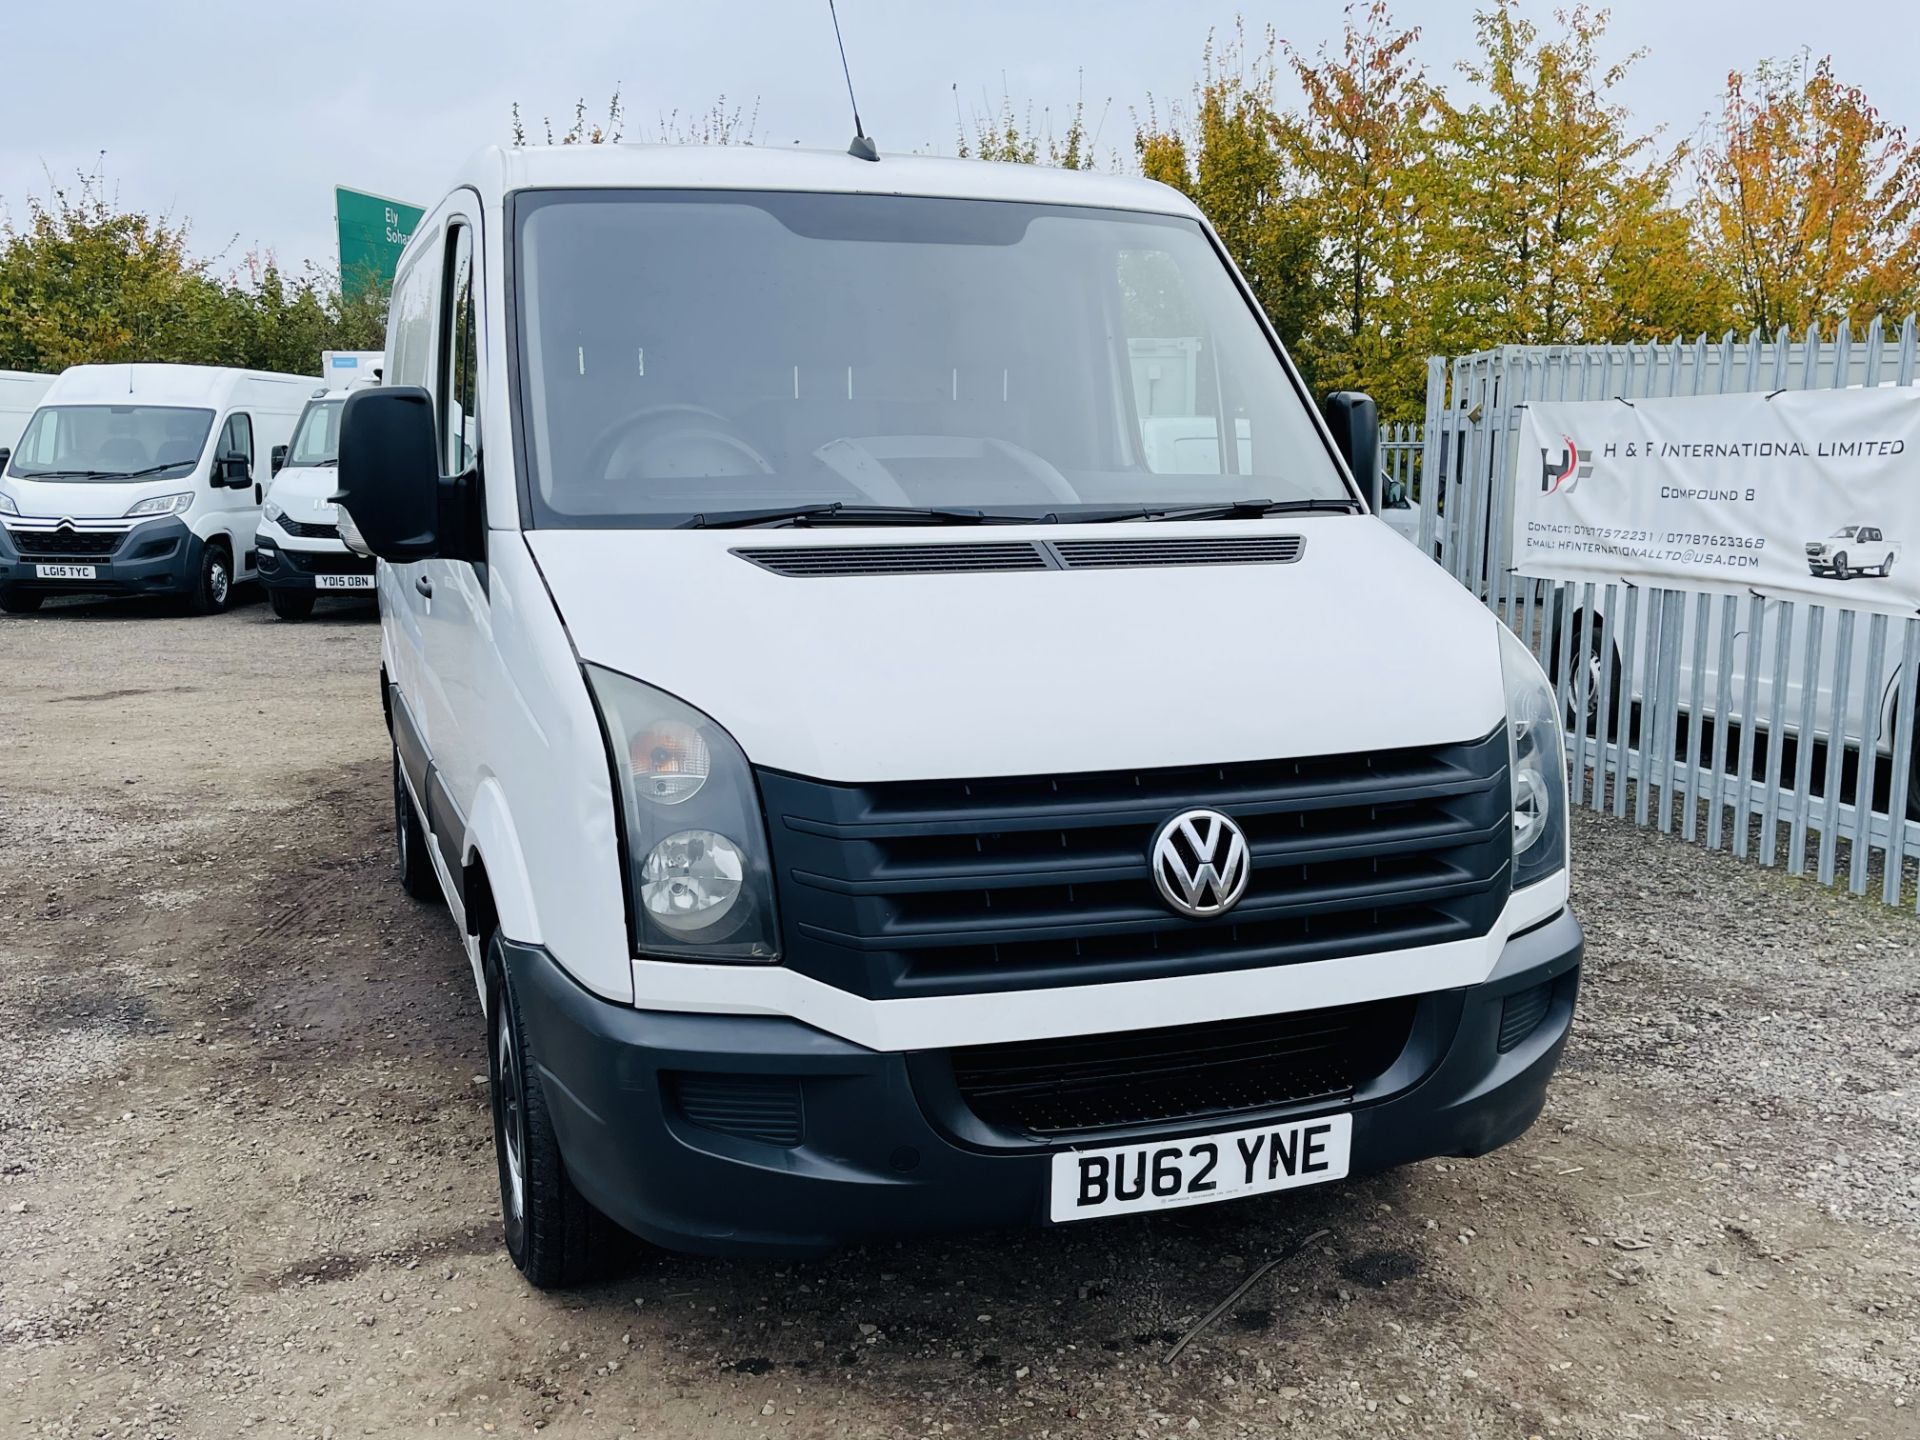 Volkswagen Crafter CR30 2.0 TDI 109 L1 H1 2012 ' 62 Reg' - Air Con - No Vat Save 20% - Image 3 of 19